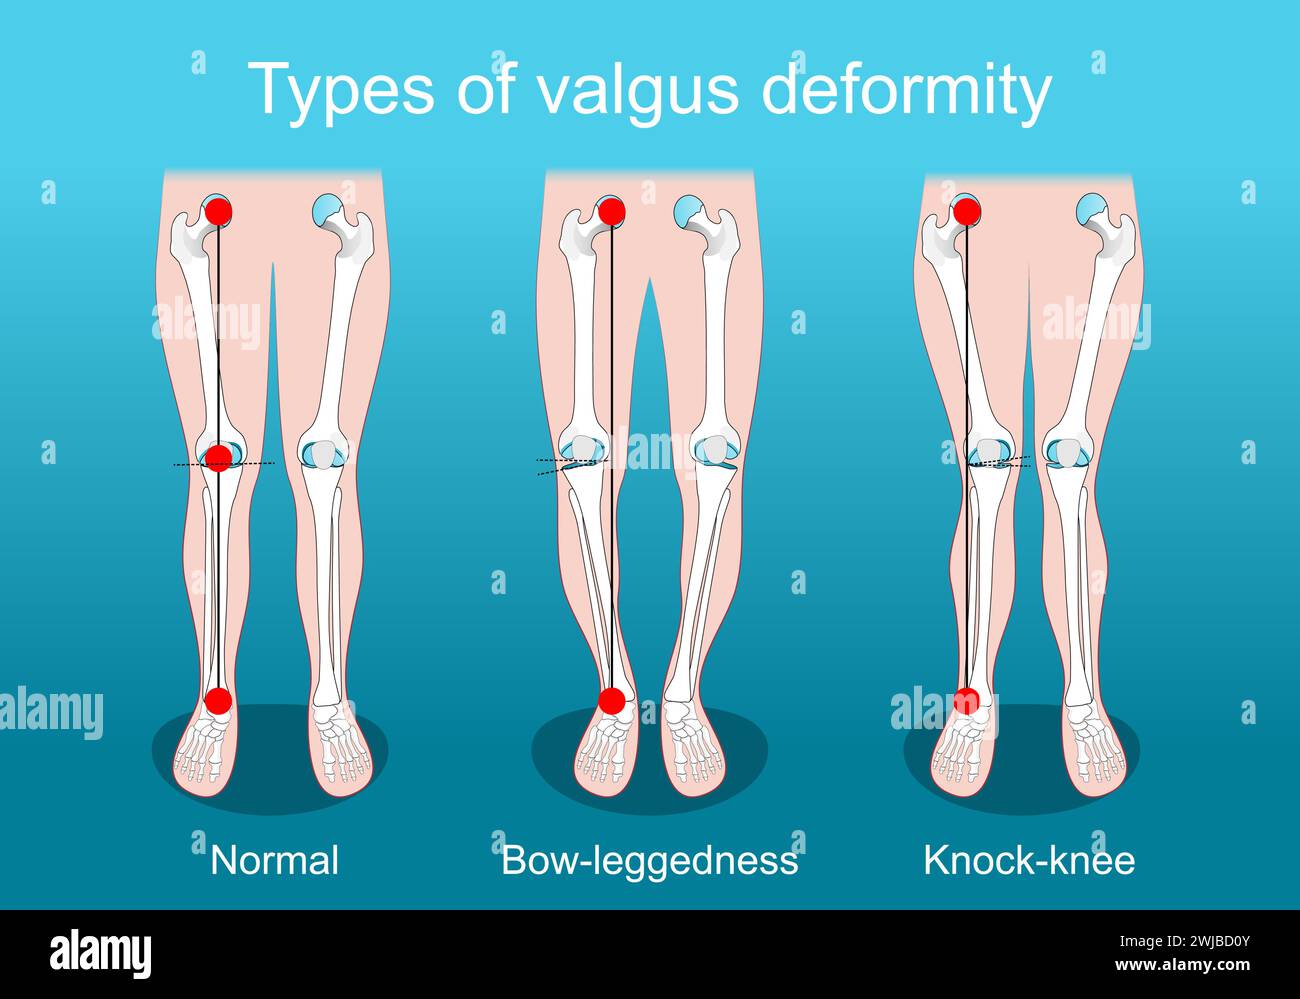 valgus deformities. Knee deformity. healthy joint, knock-knee and Bow-leggedness. Human legs, bones and joints. Corrective surgery. Vector poster. Iso Stock Vector